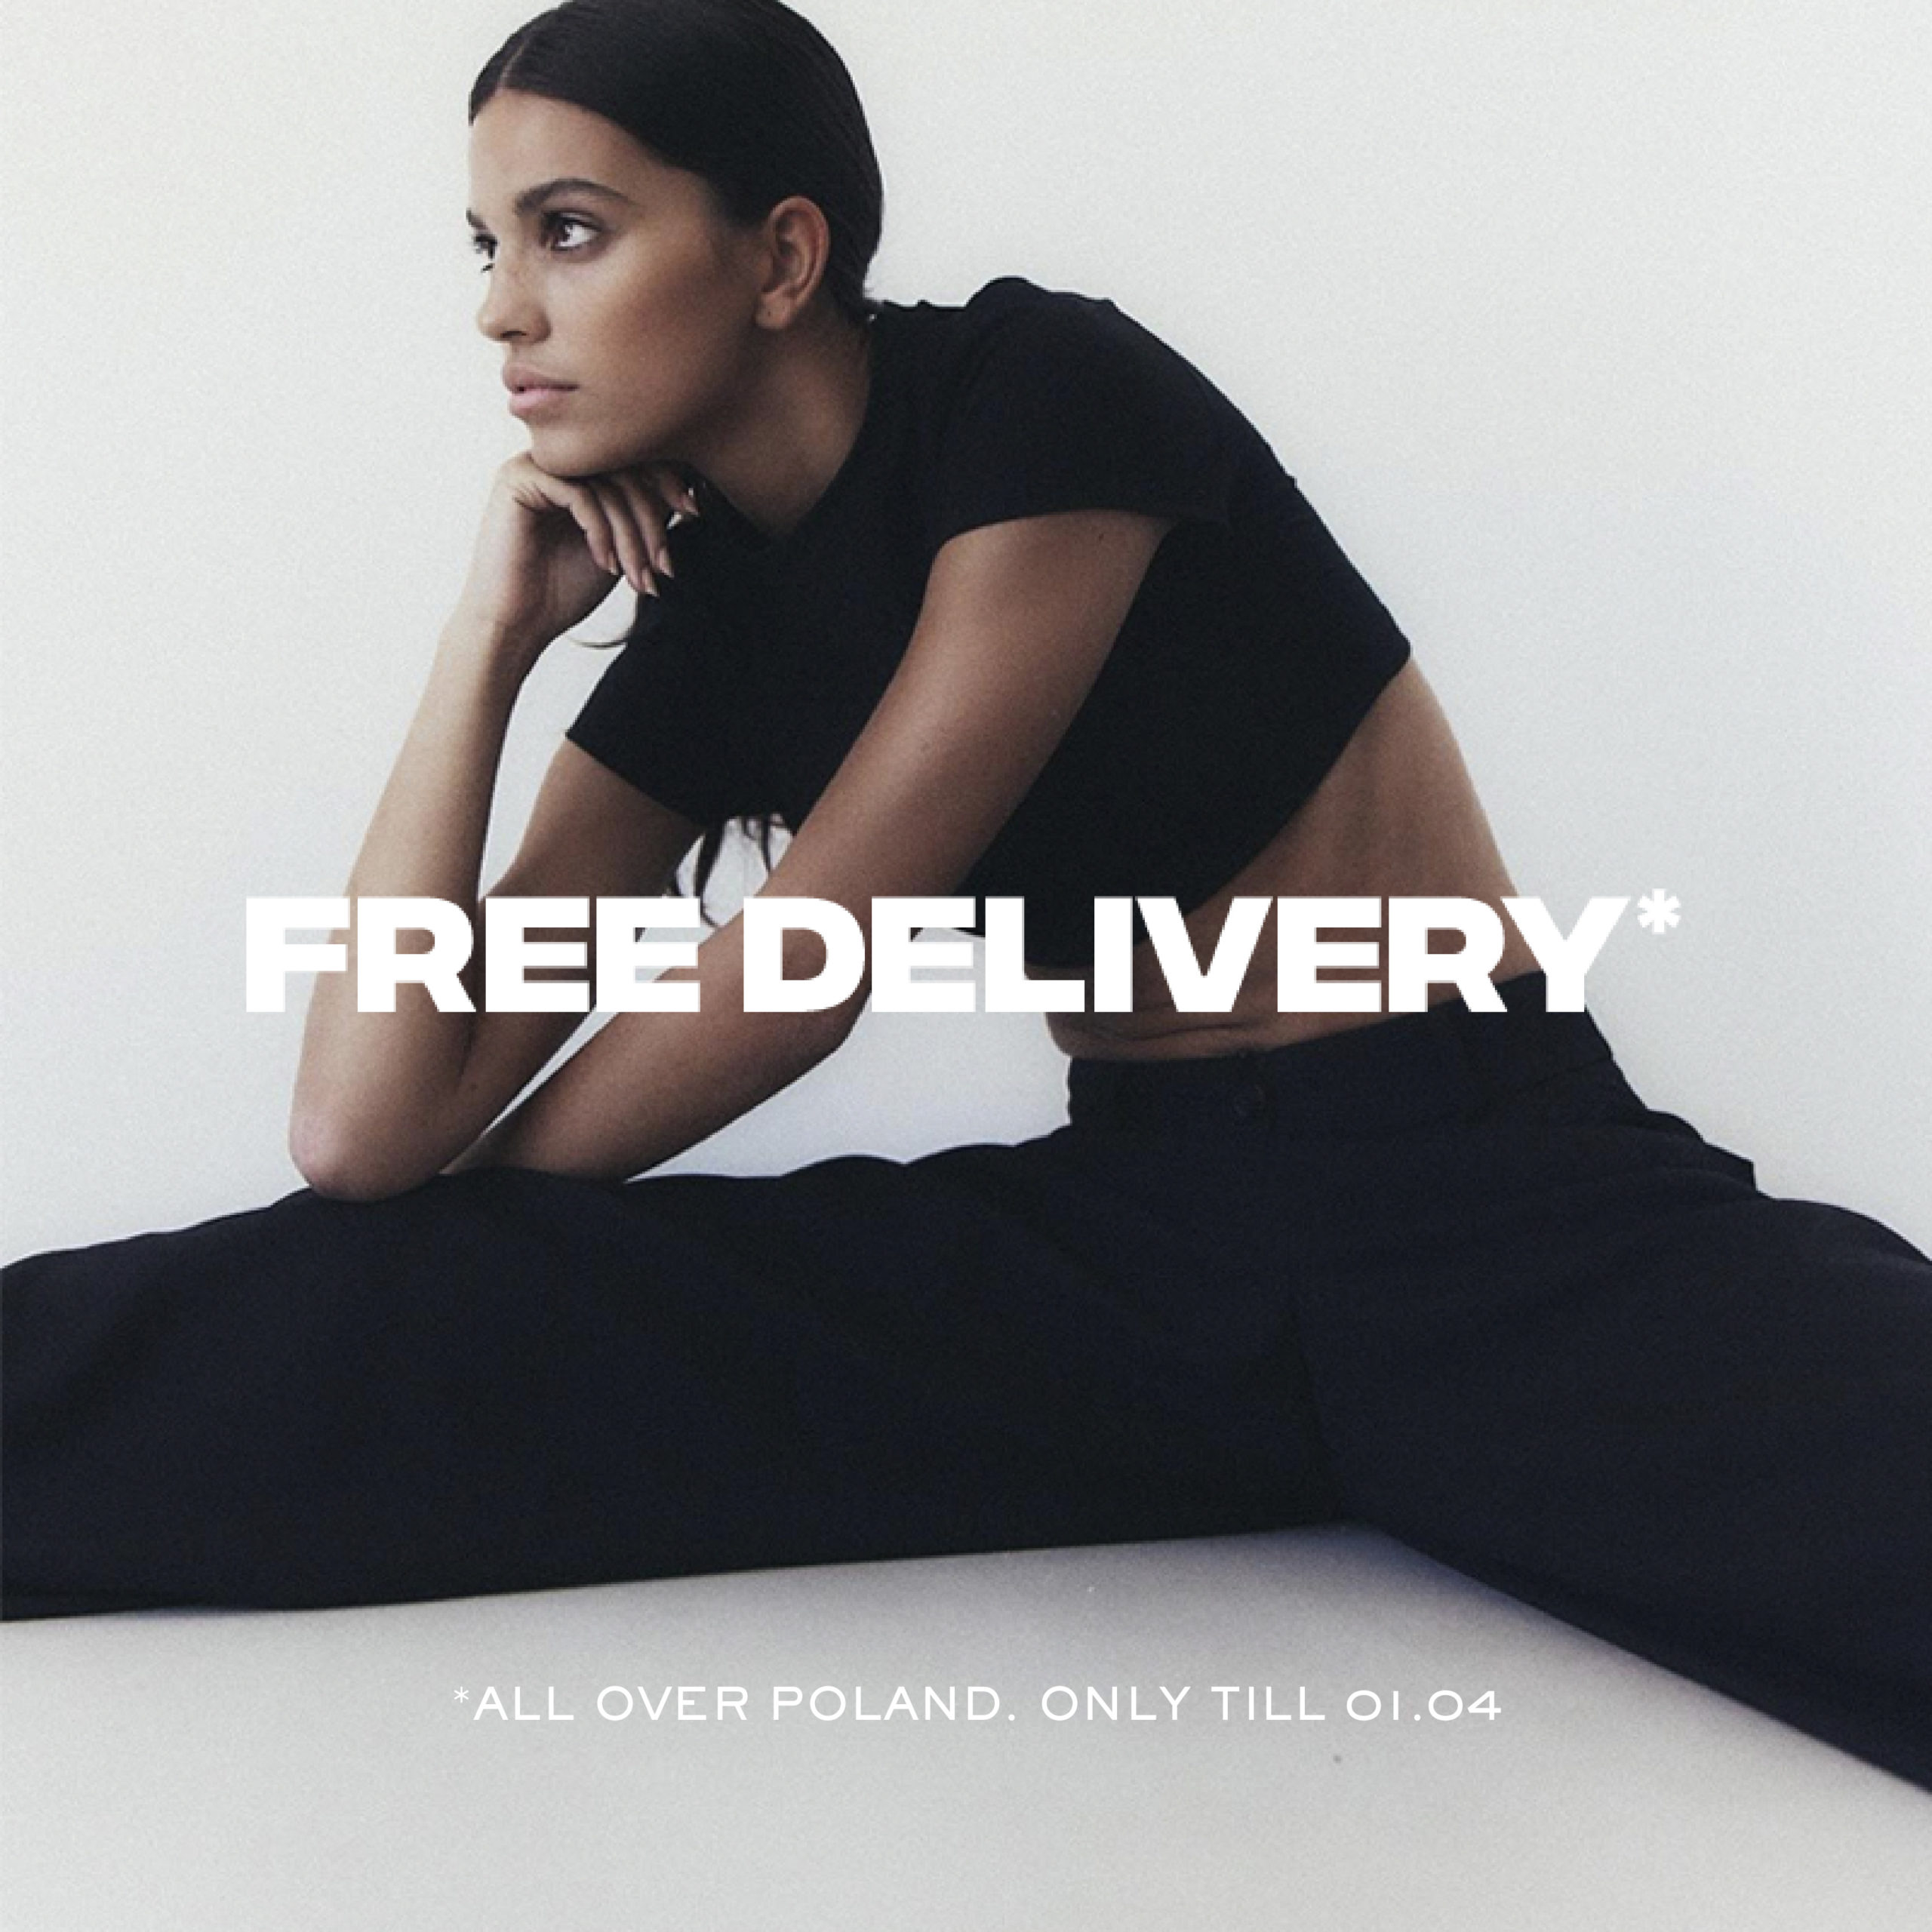 Pop Up Freedelivery